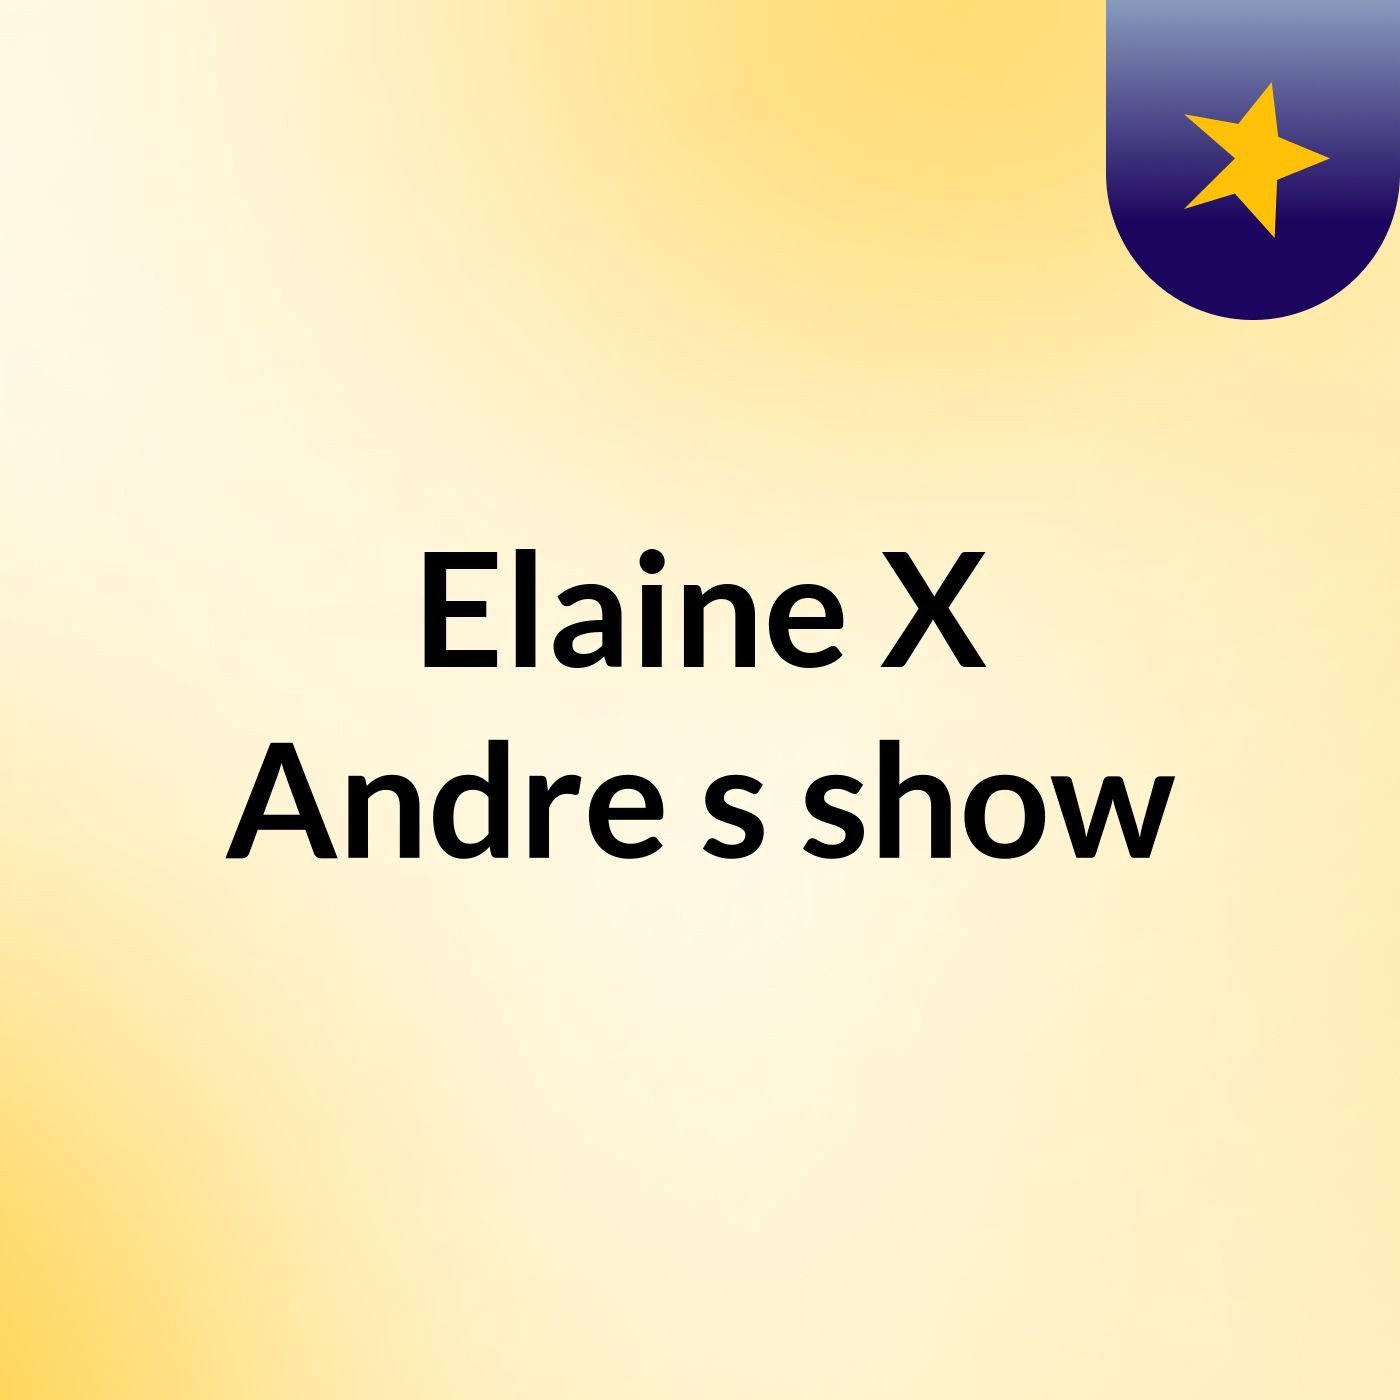 Elaine X Andre's show